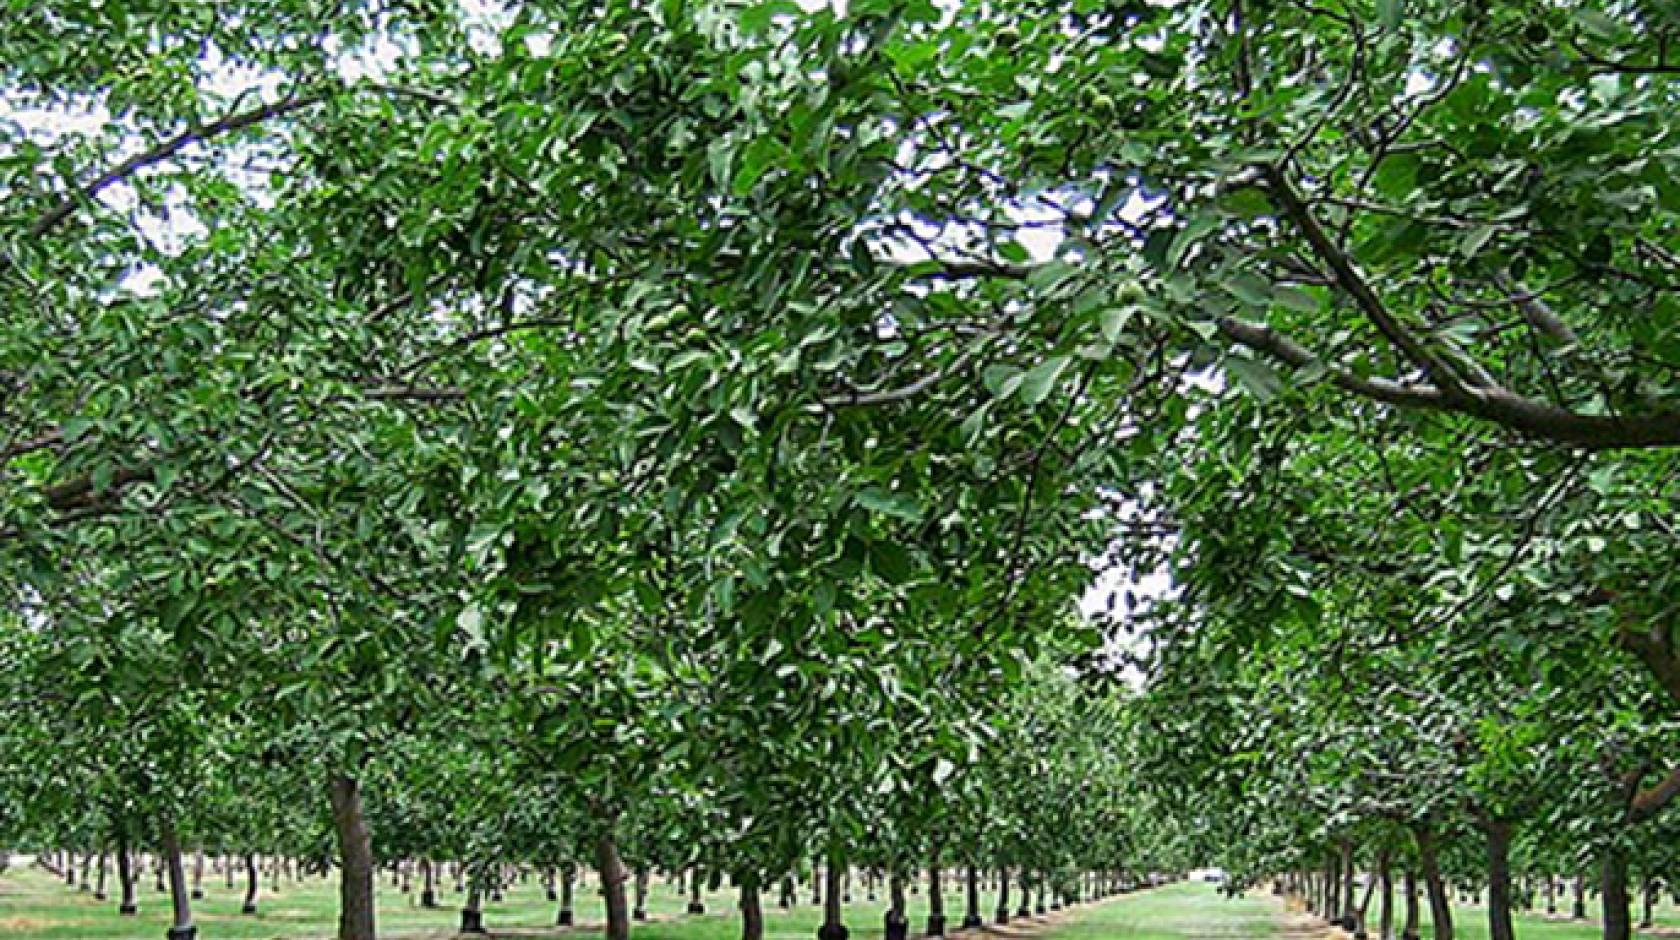 Walnuts, a top California export crop, grow in orchards like this.